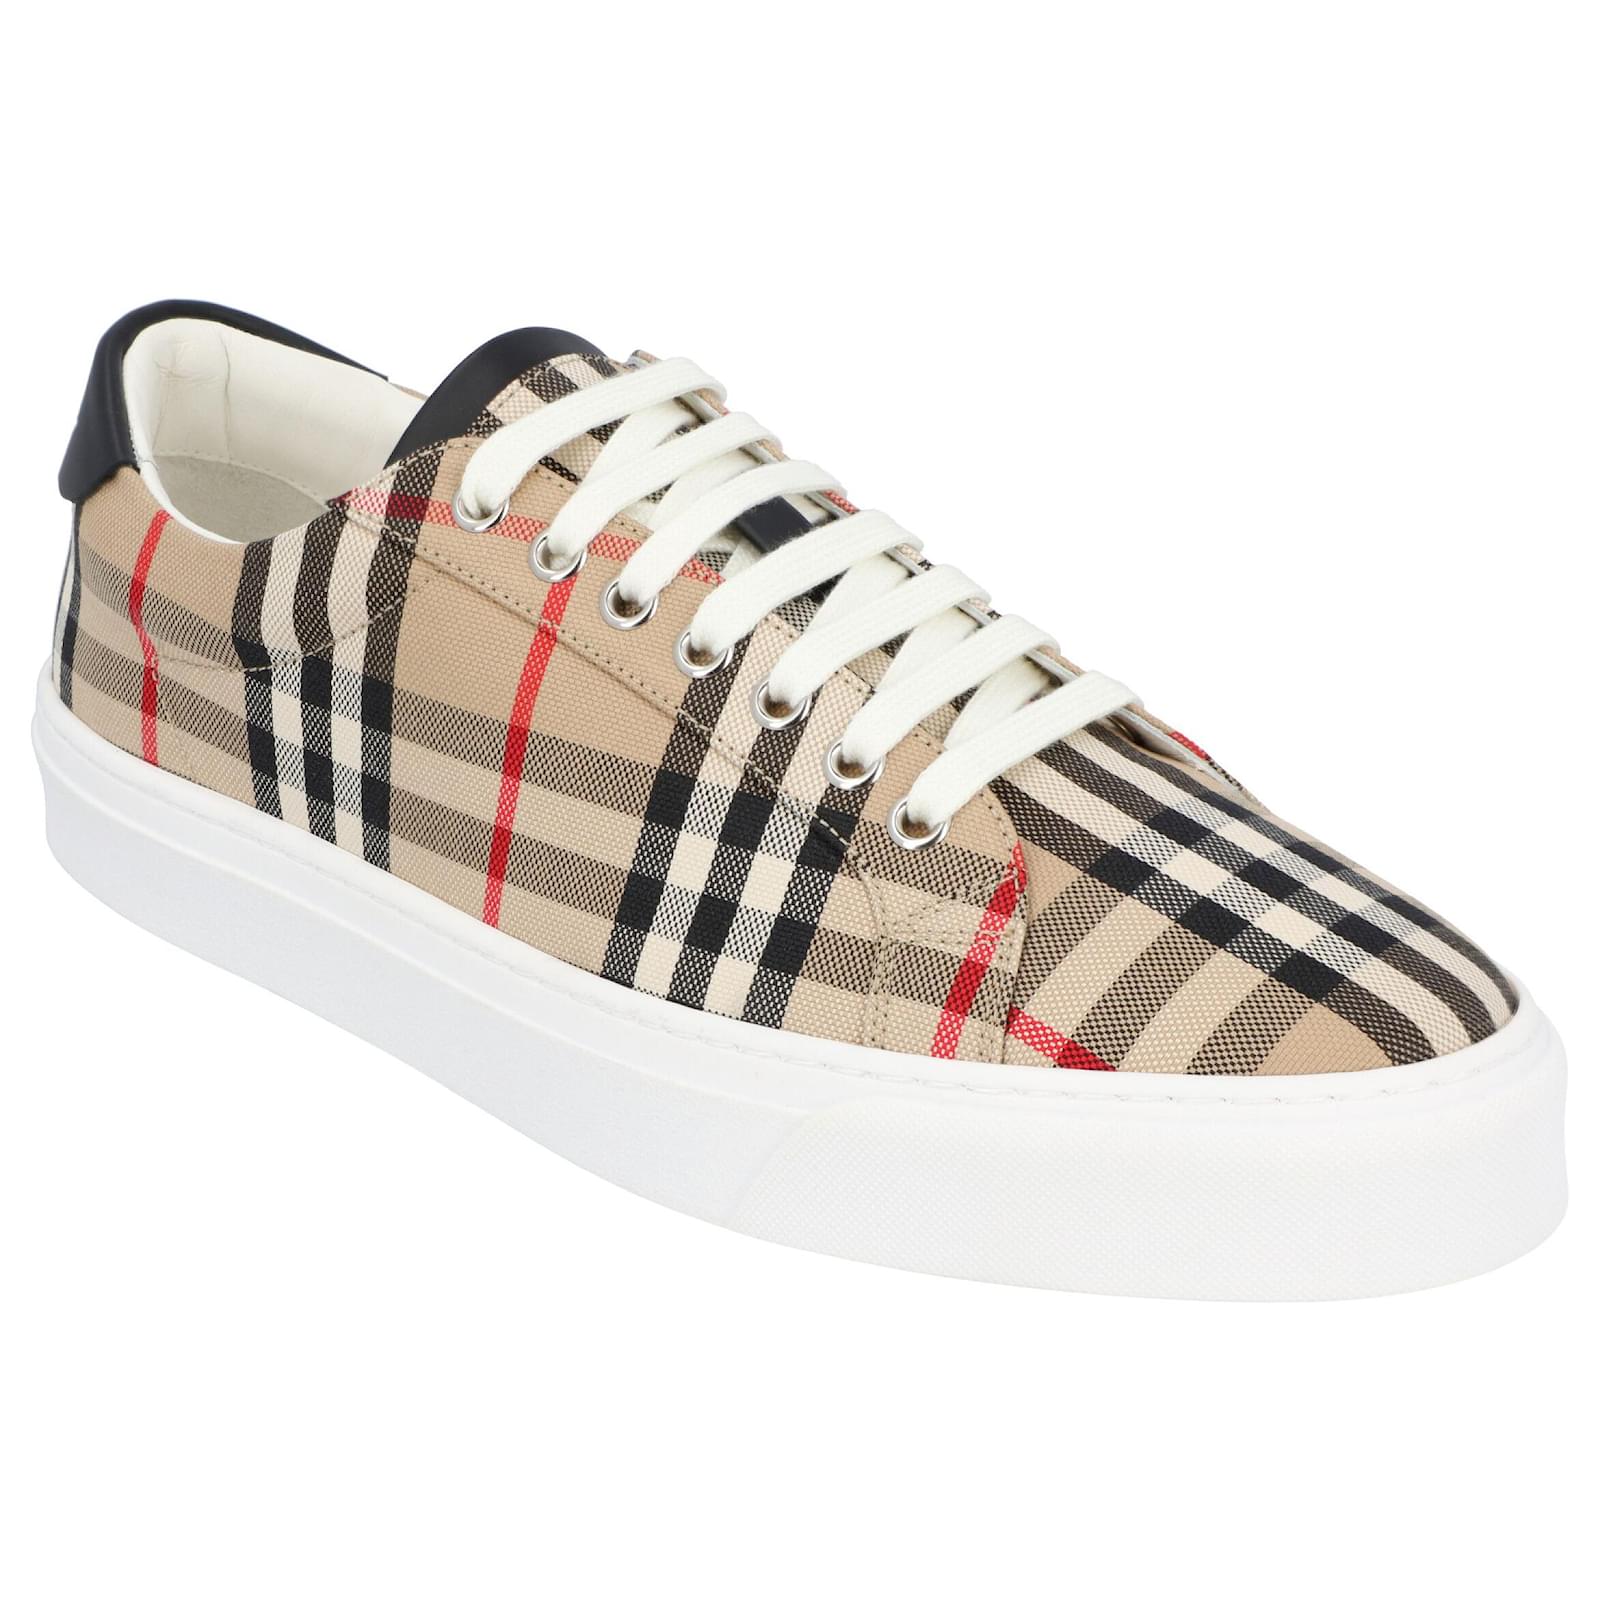 Burberry men vintage check sneakers in archive beige cotton and leather   - Joli Closet